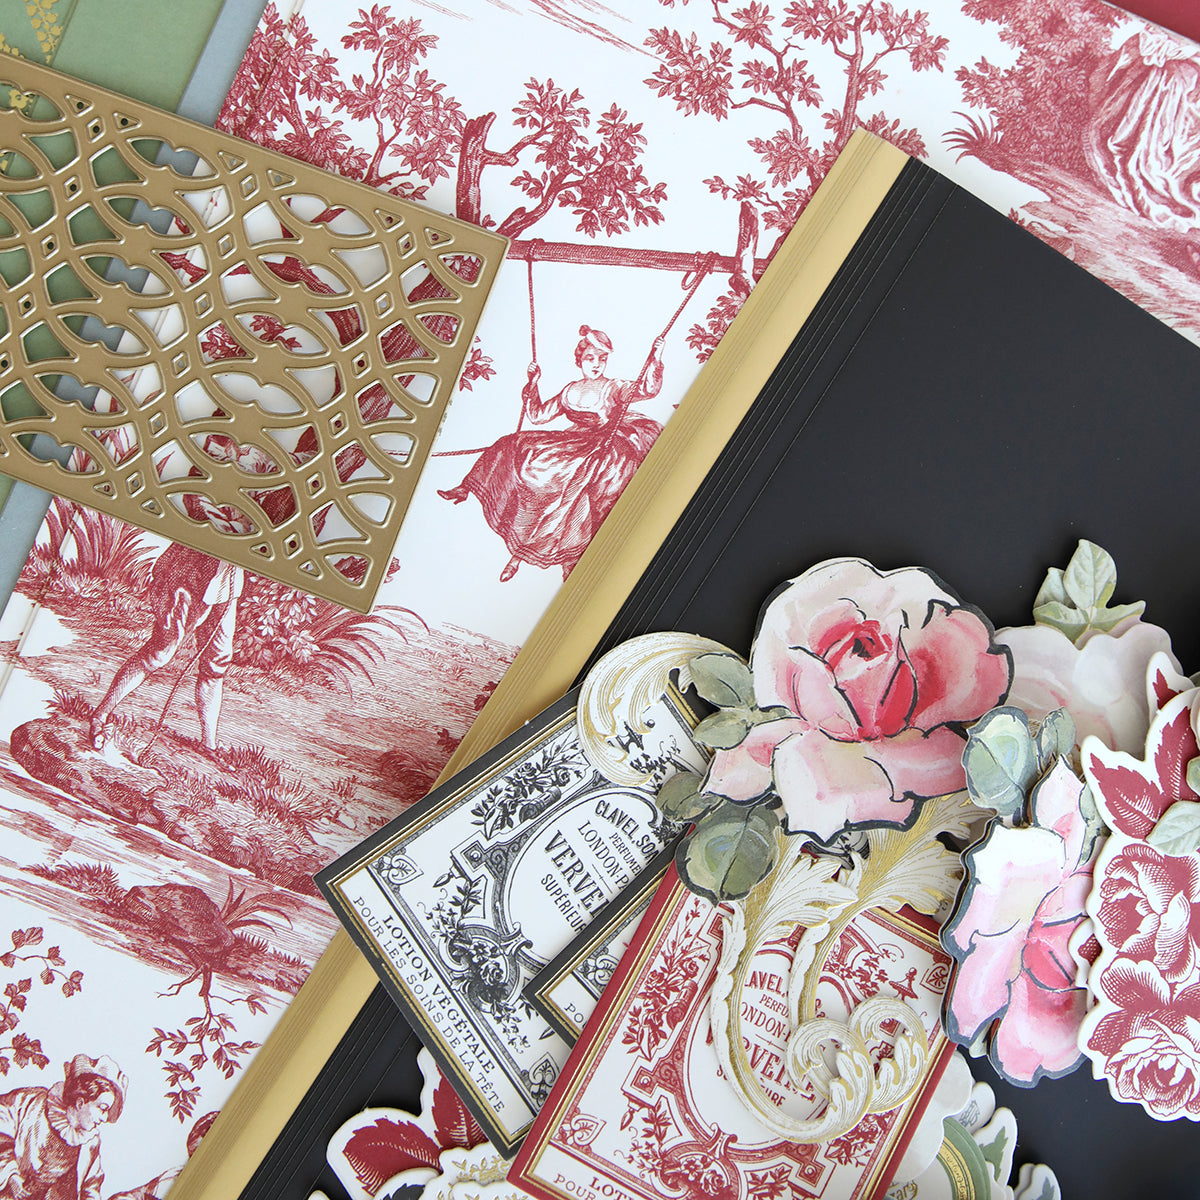 A gift-wrapped Anna Griffin Perfume Box Class Materials and Dies adorned with delicate rose designs.